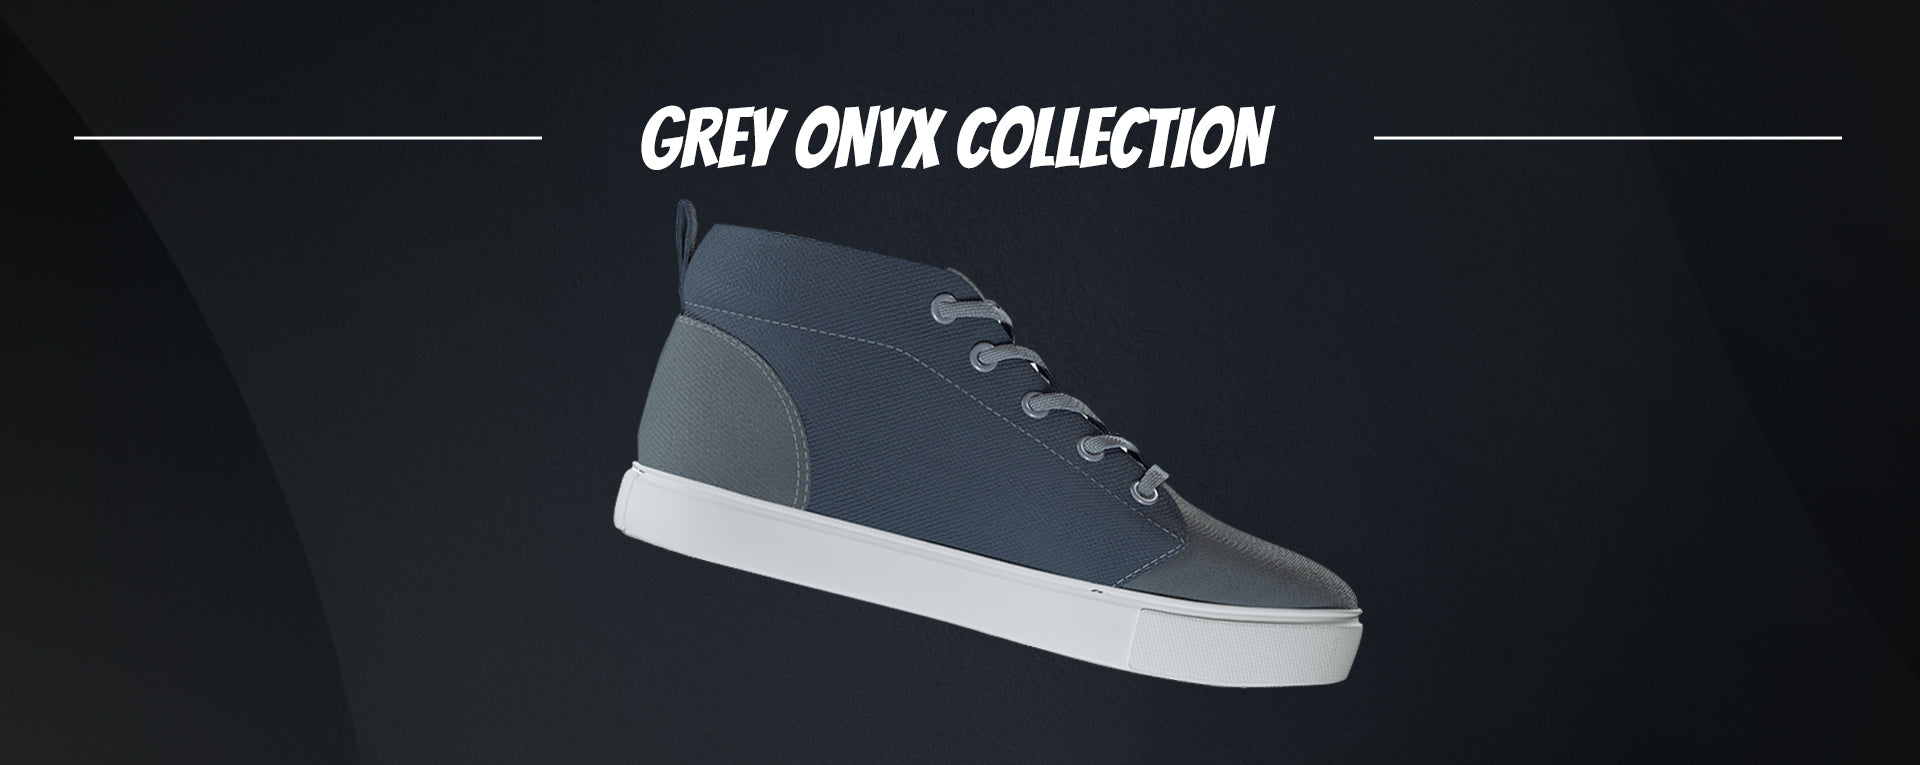 Grey Onyx, Casual Sneaker Shoes for Men